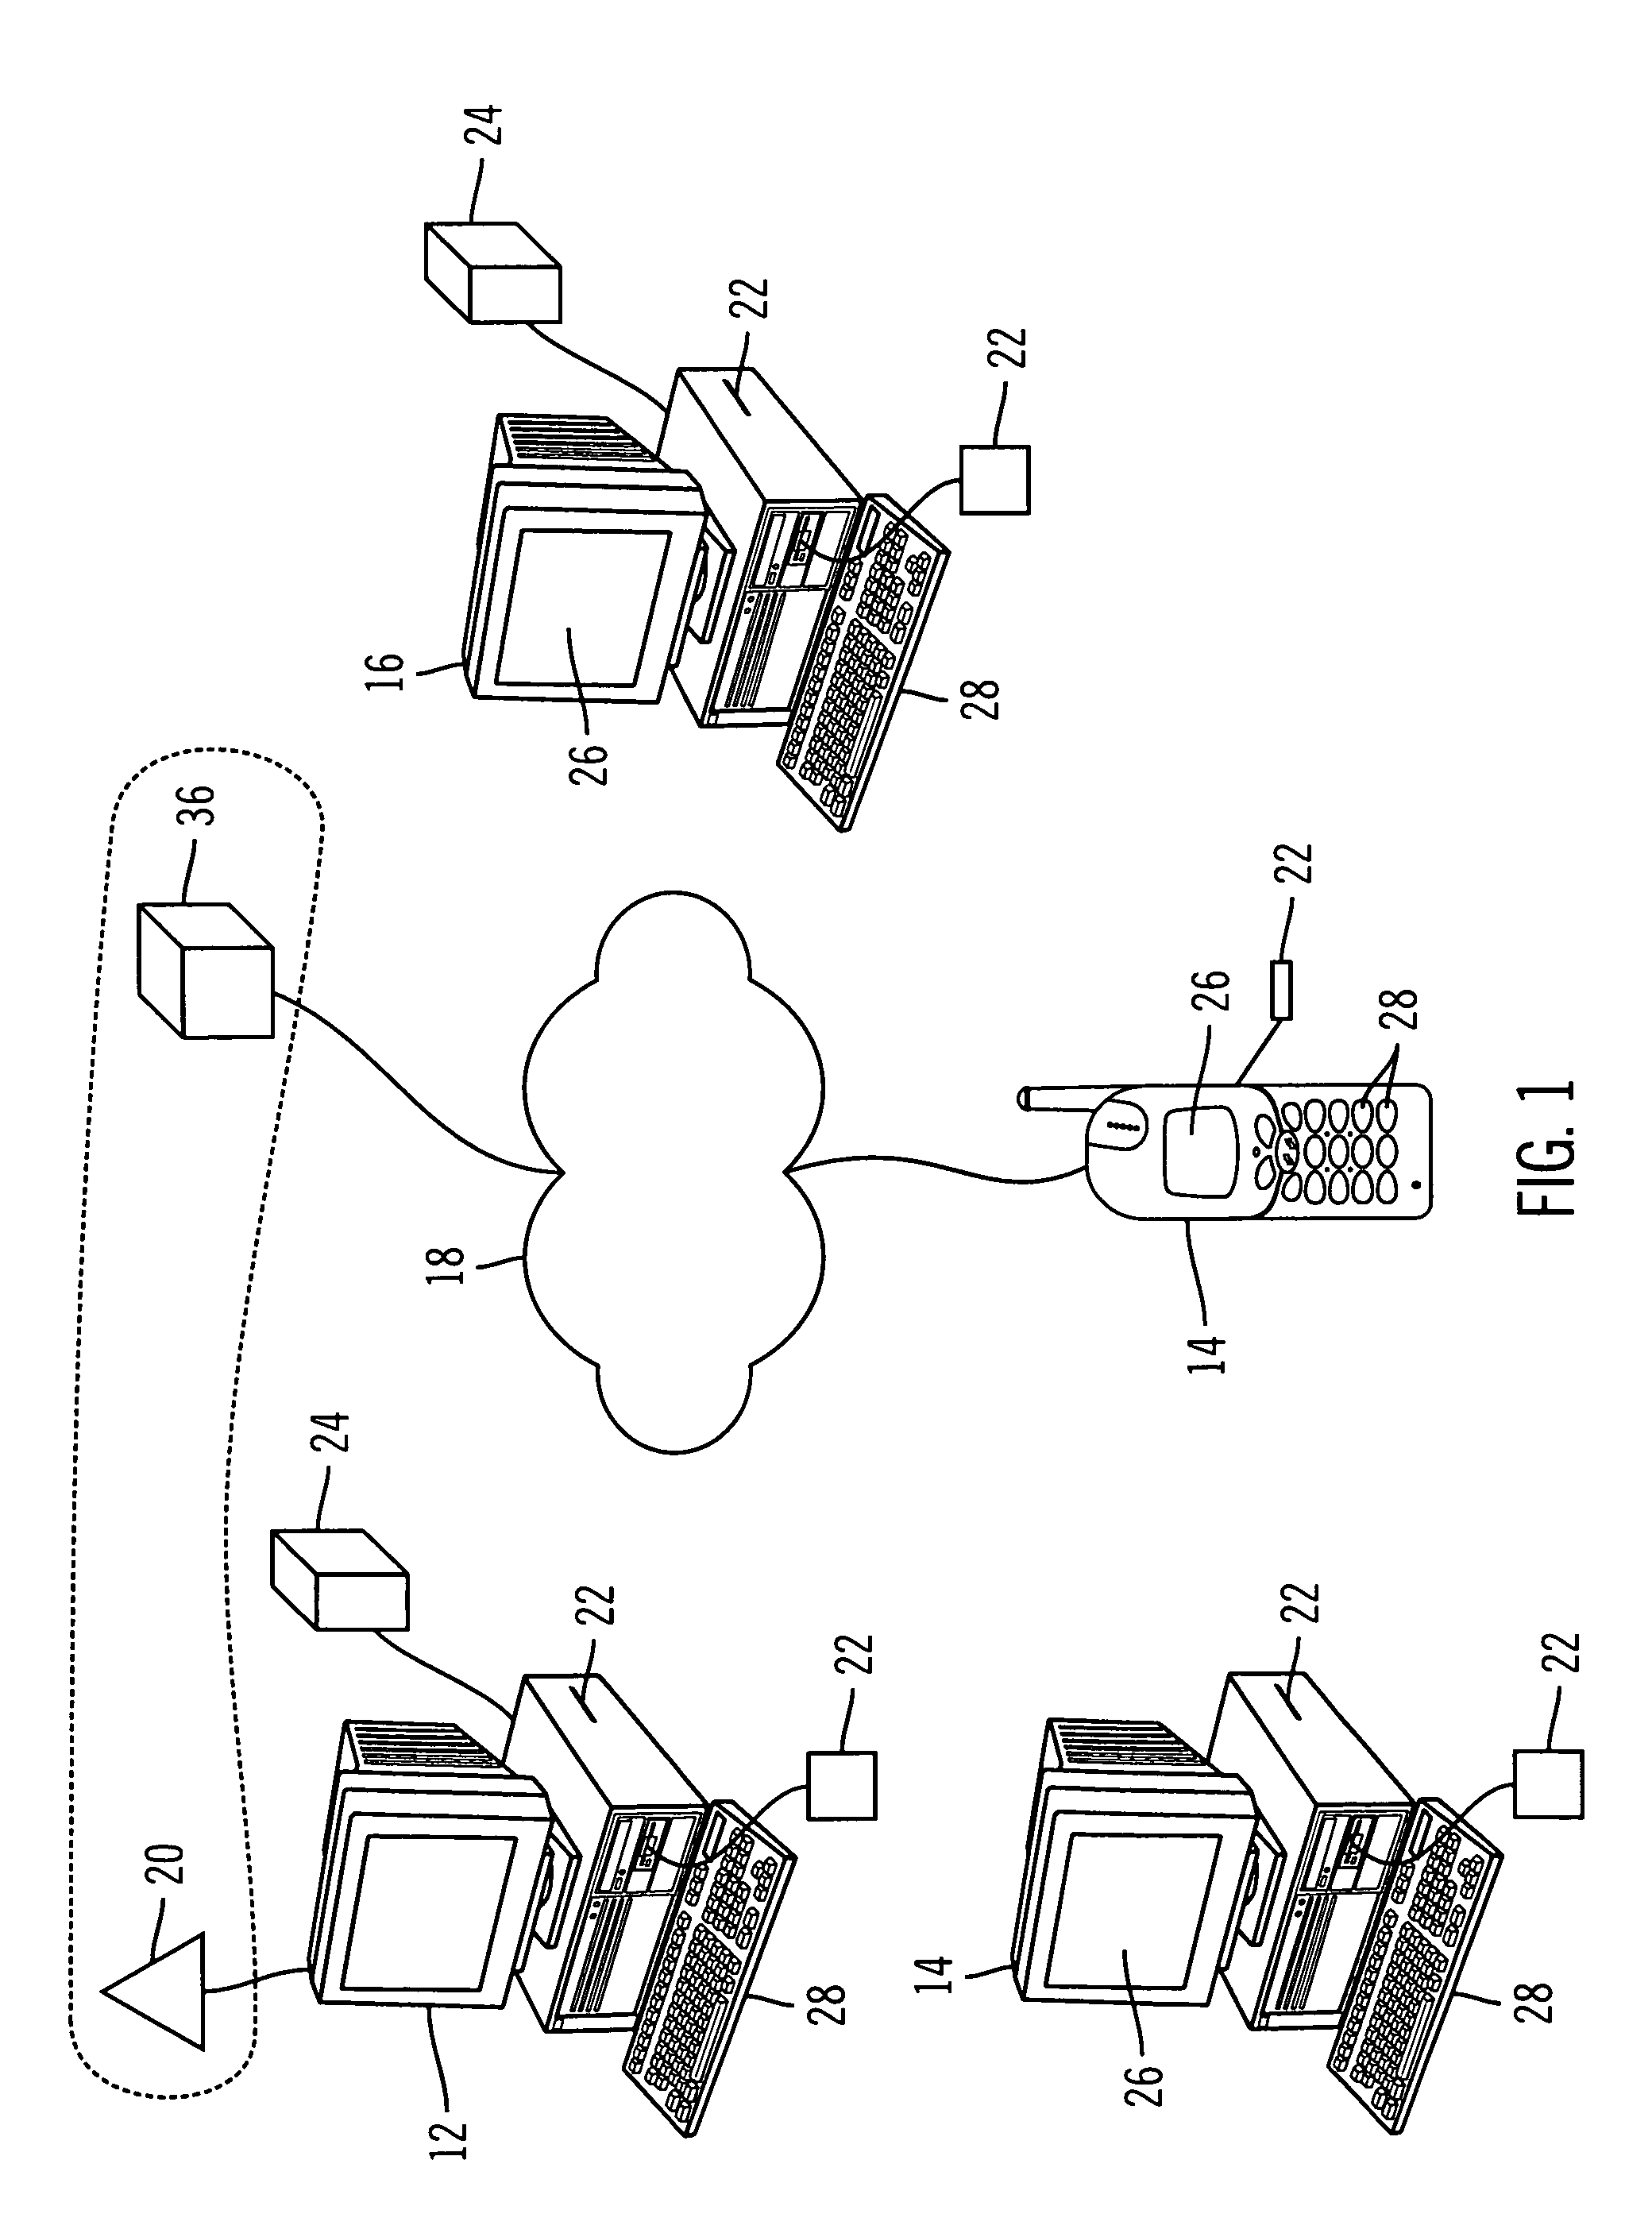 Password protection system and method